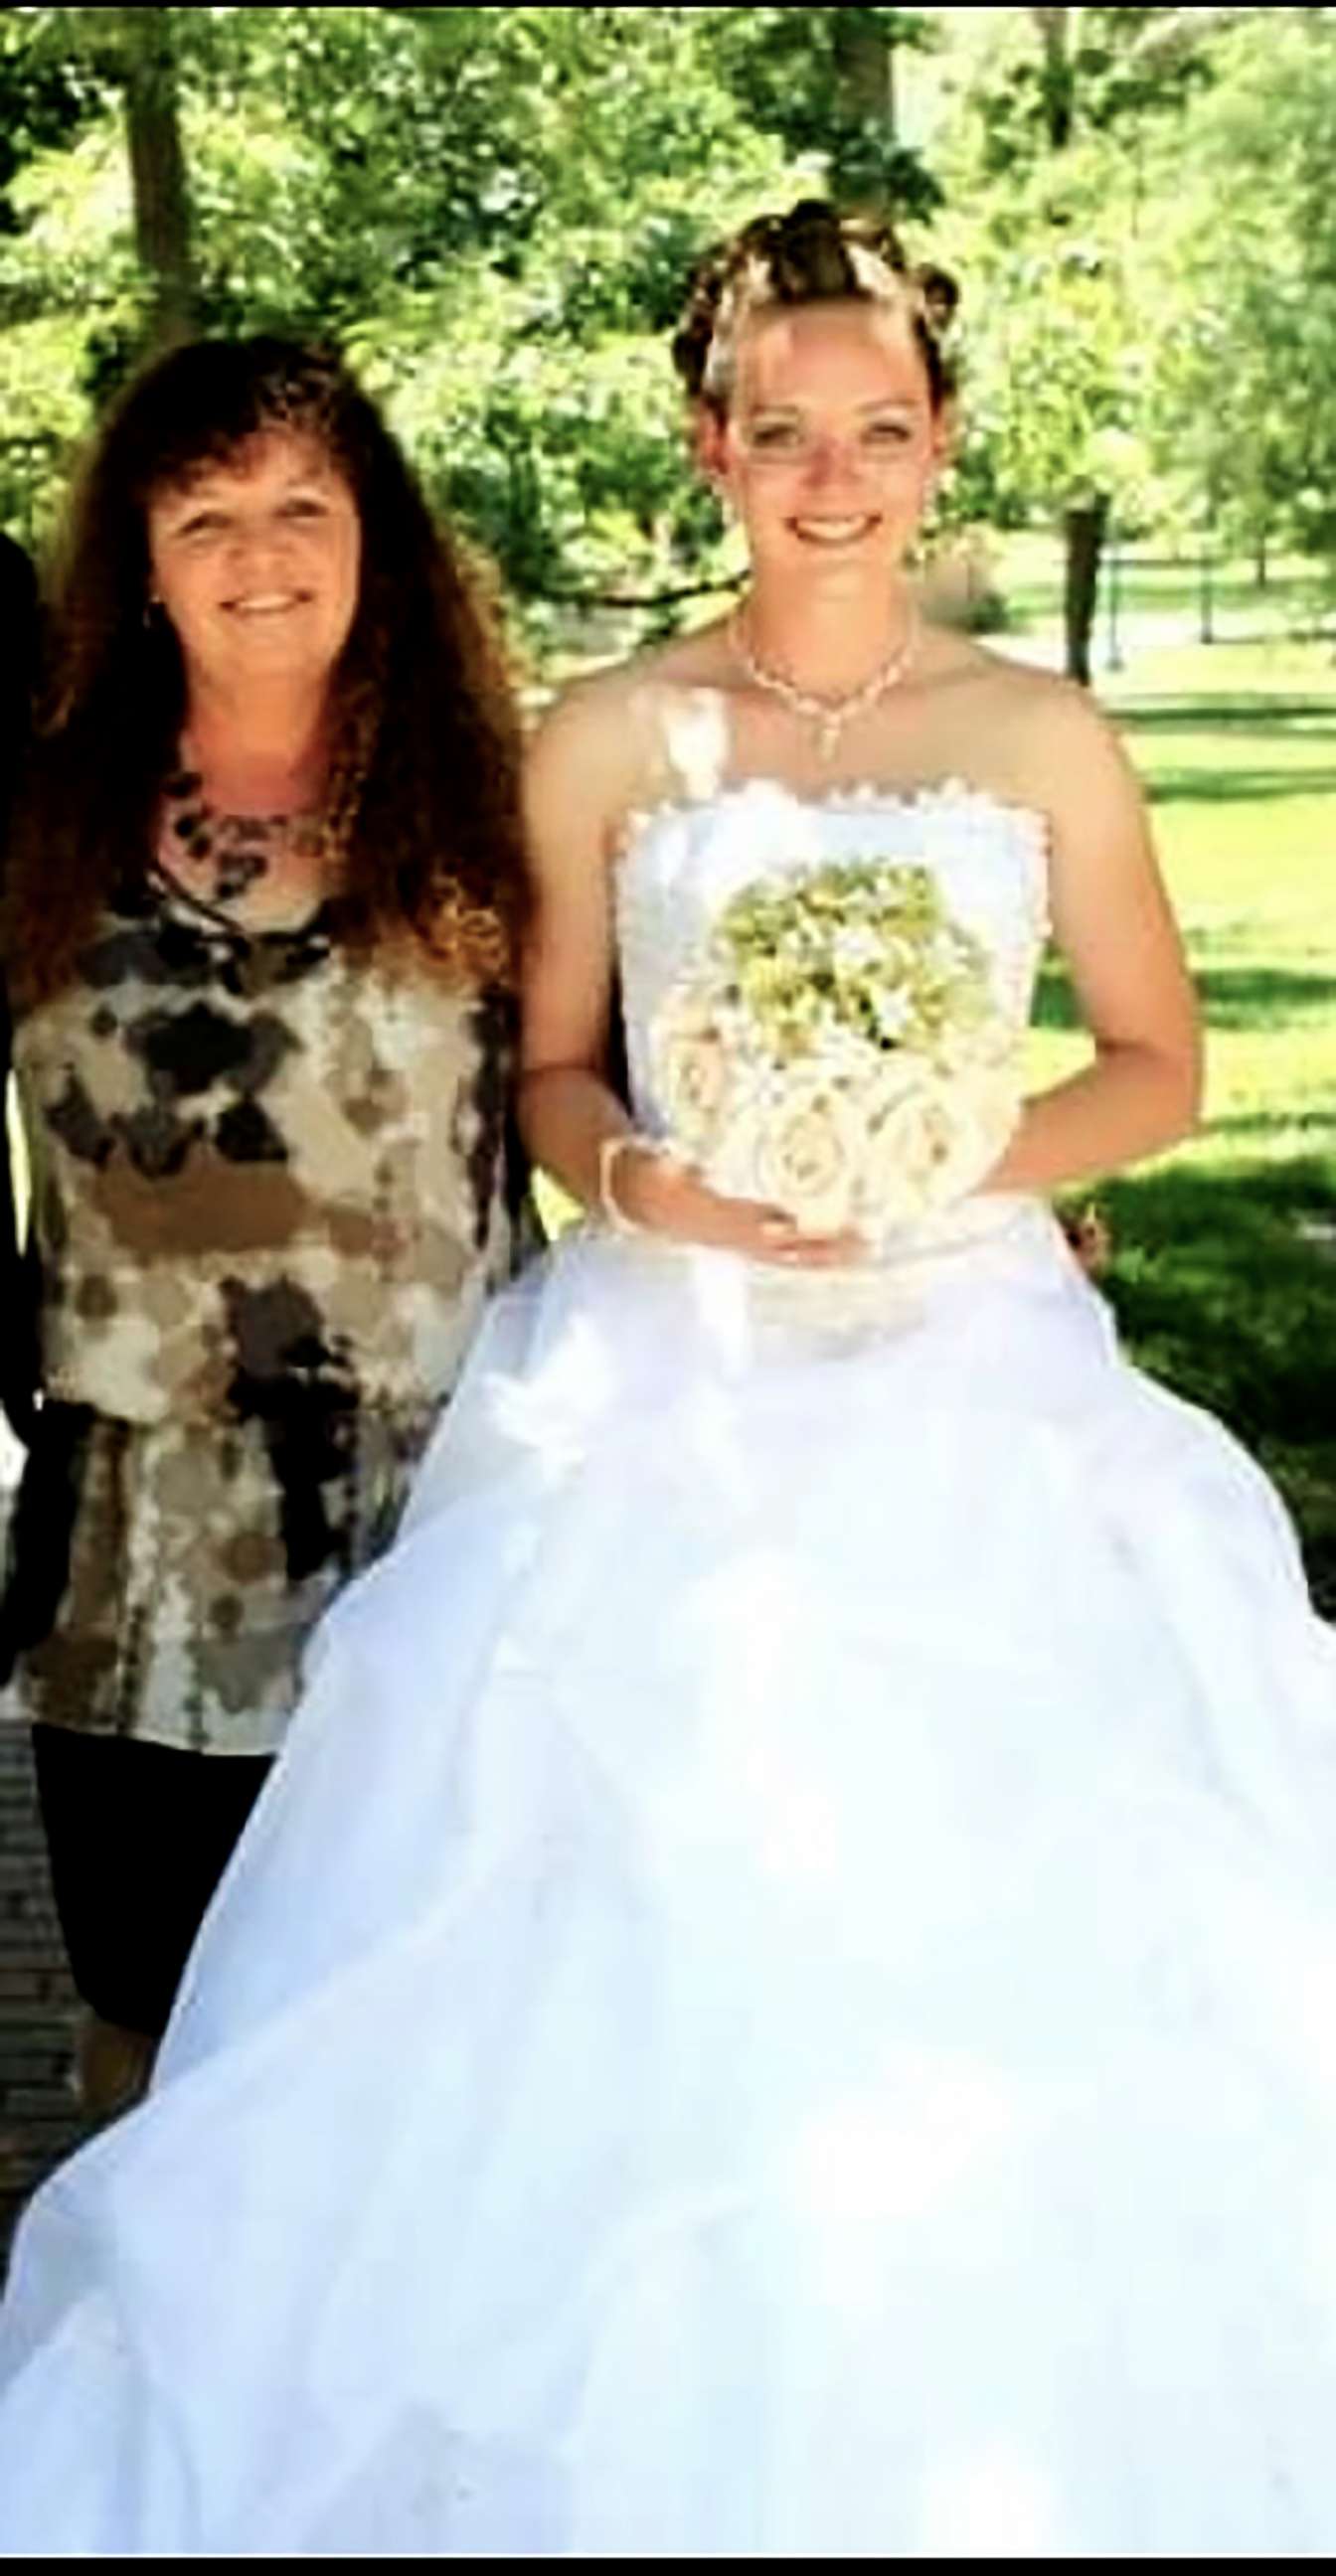 PHOTO: Casey Flory is pictured on her wedding day with her mom, Debbie Harker.